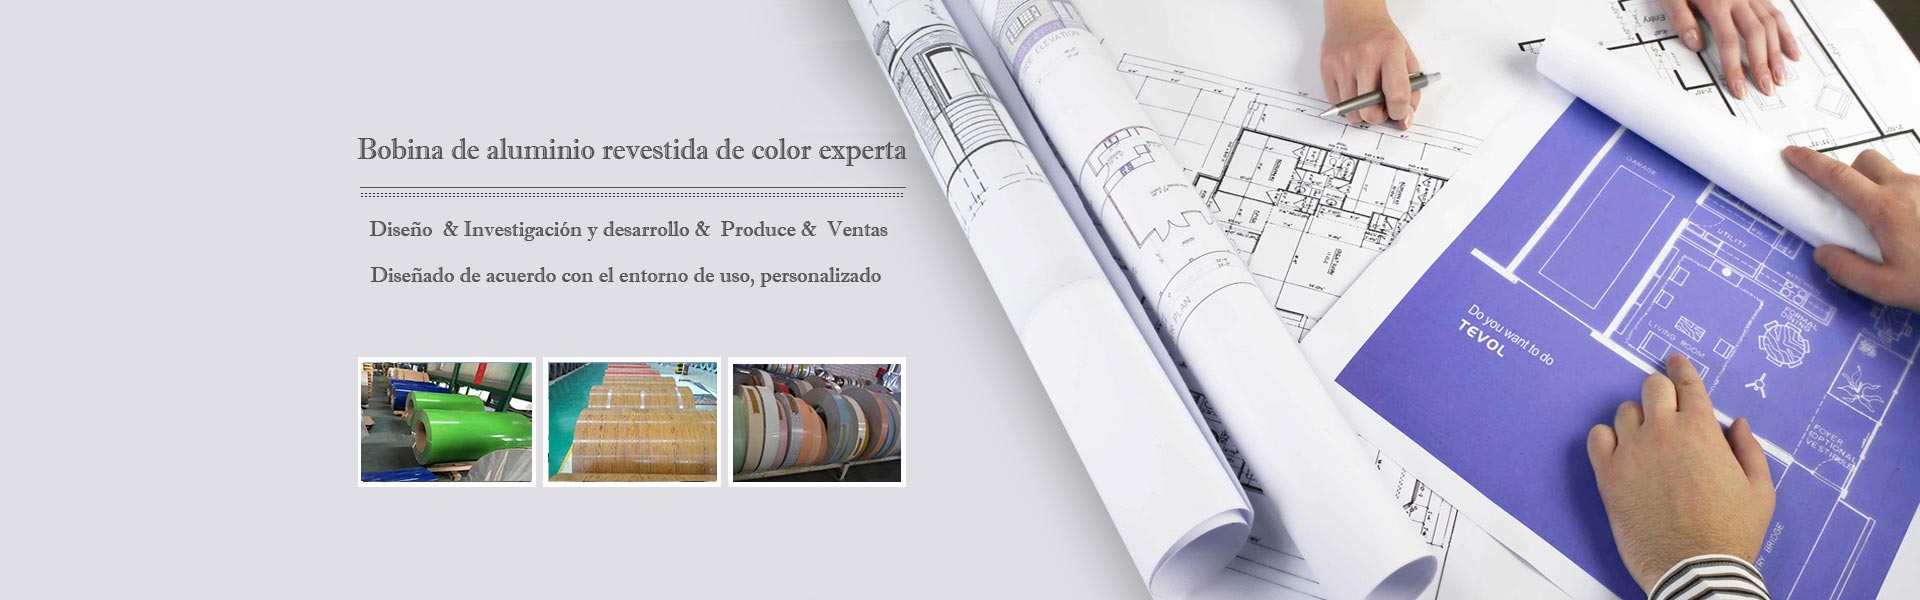 Color coated aluminum coil expert